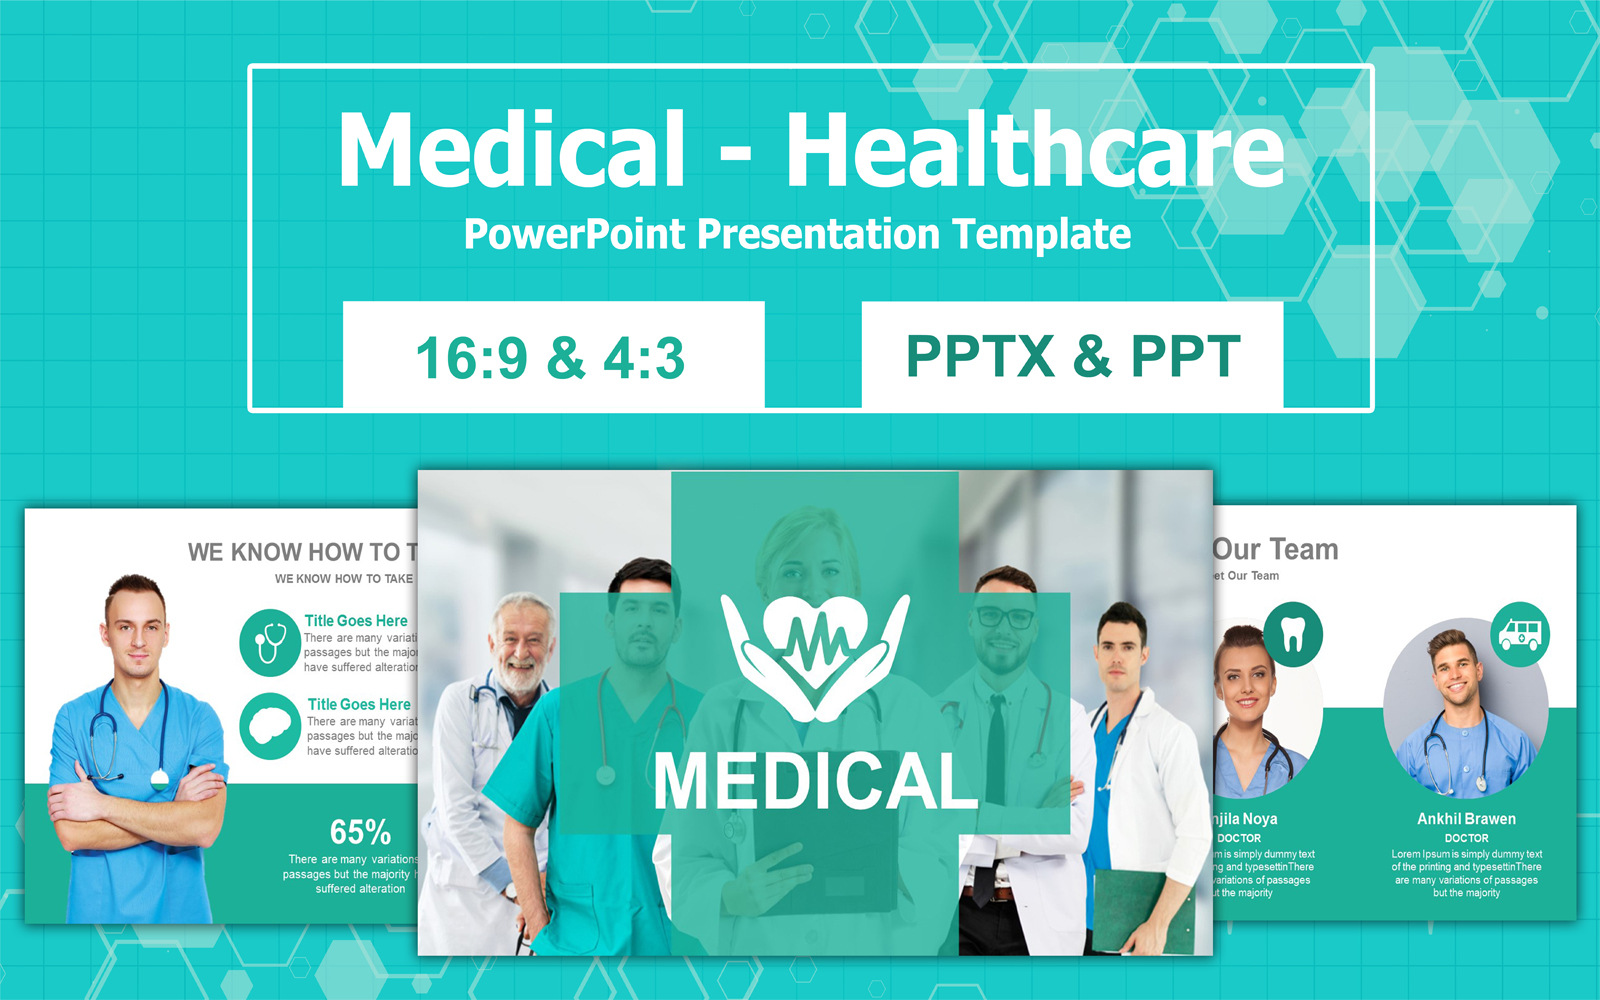 Medical - Healthcare PowerPoint Presentation Template